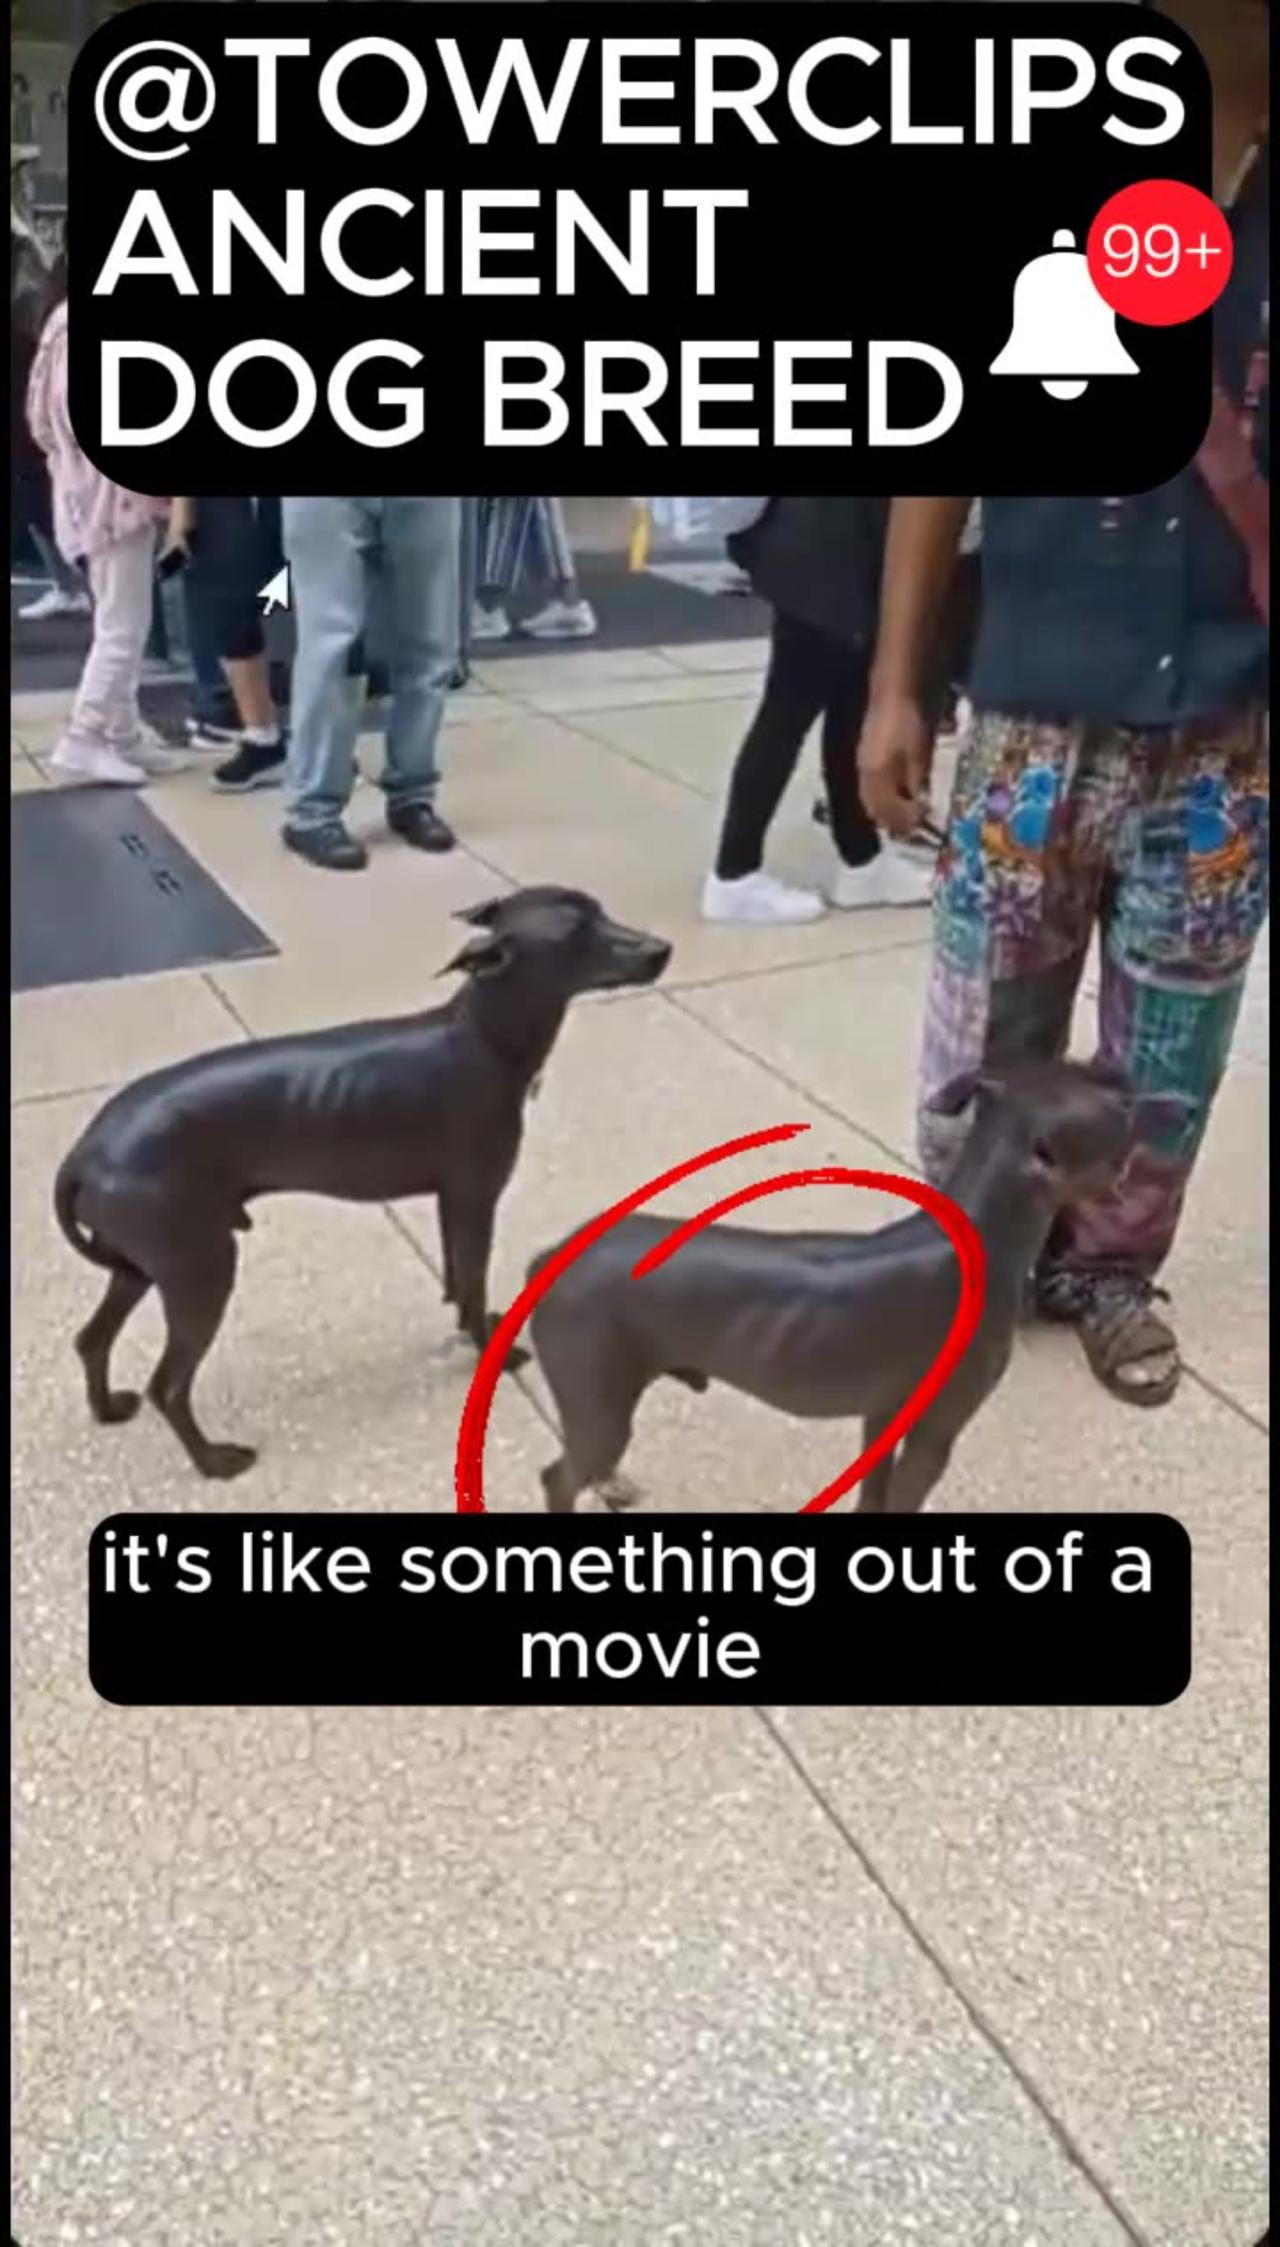 UNKNOWN DOG BREED SPOTTED!!! NEVER SEEN BEFORE!!! WATCH NOW!!!